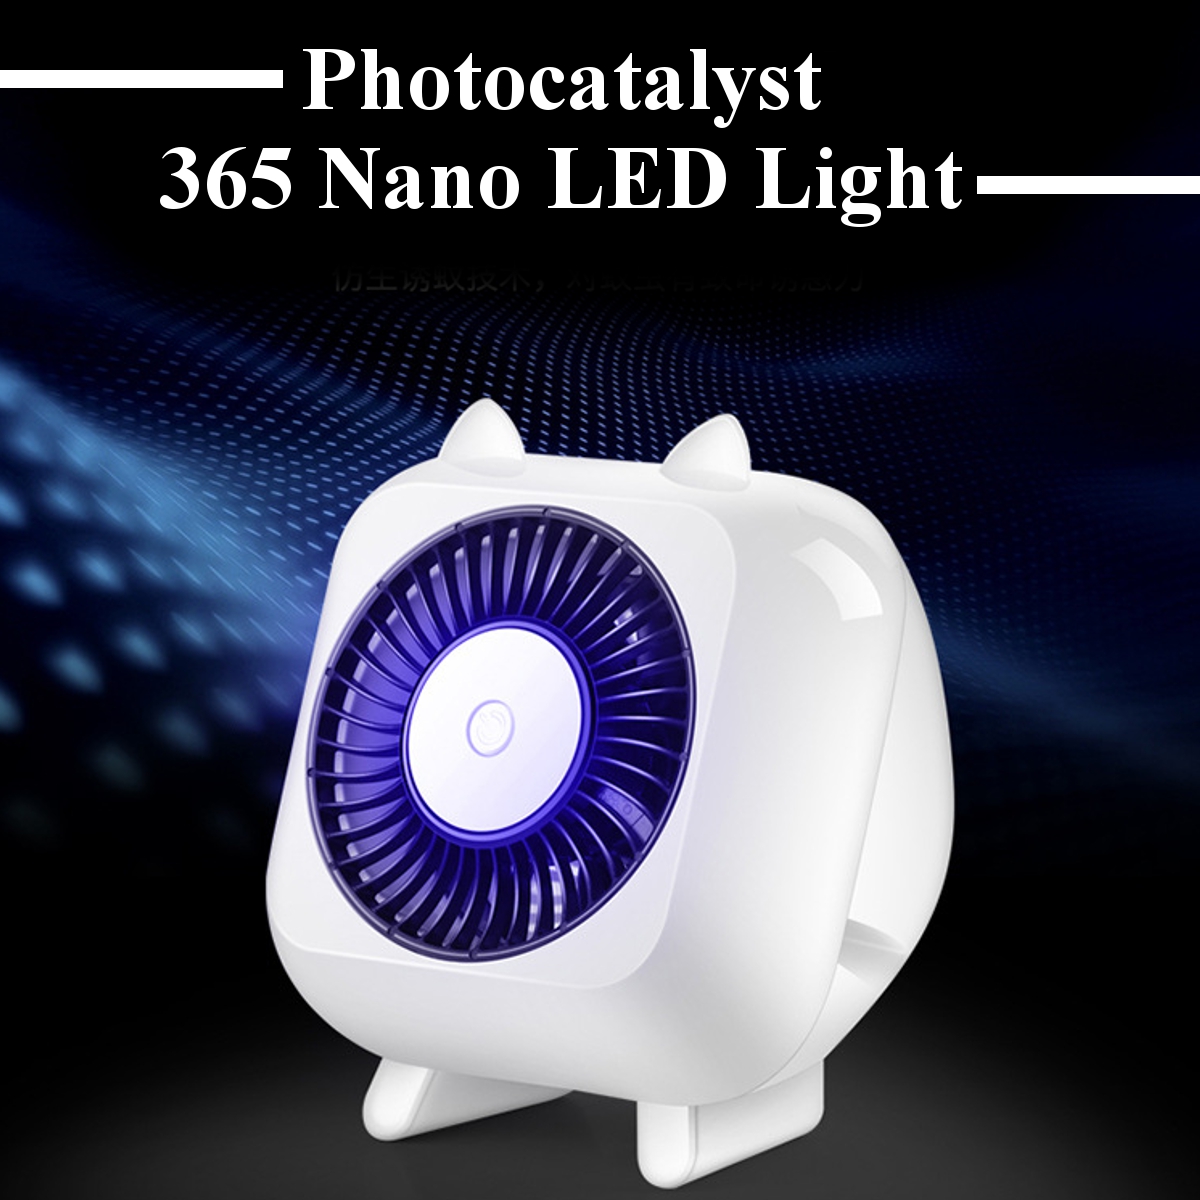 Electric-Photocatalyst-LED-Mosquito-Trapping-Catcher-Lamp-Insect-killer-Trap-Light-1533647-4